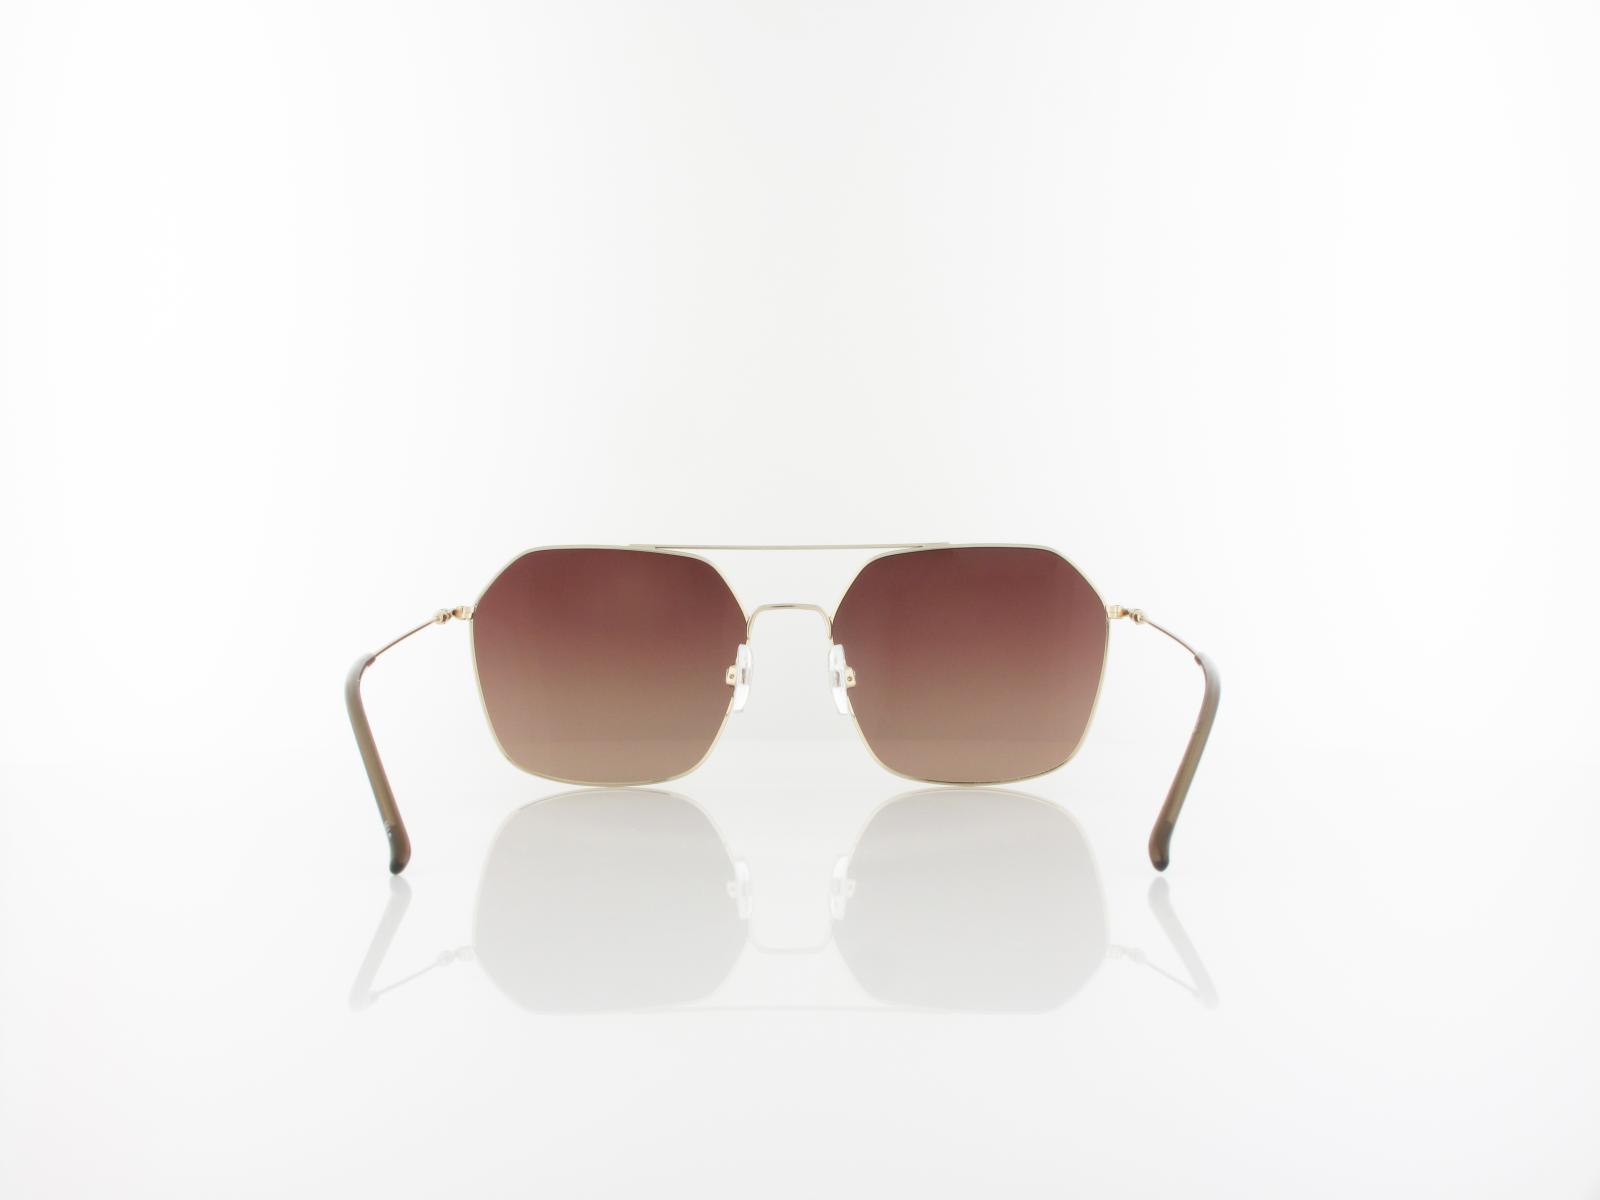 HIS polarized | HPS24104-1 59 | gold / brown gradient pol